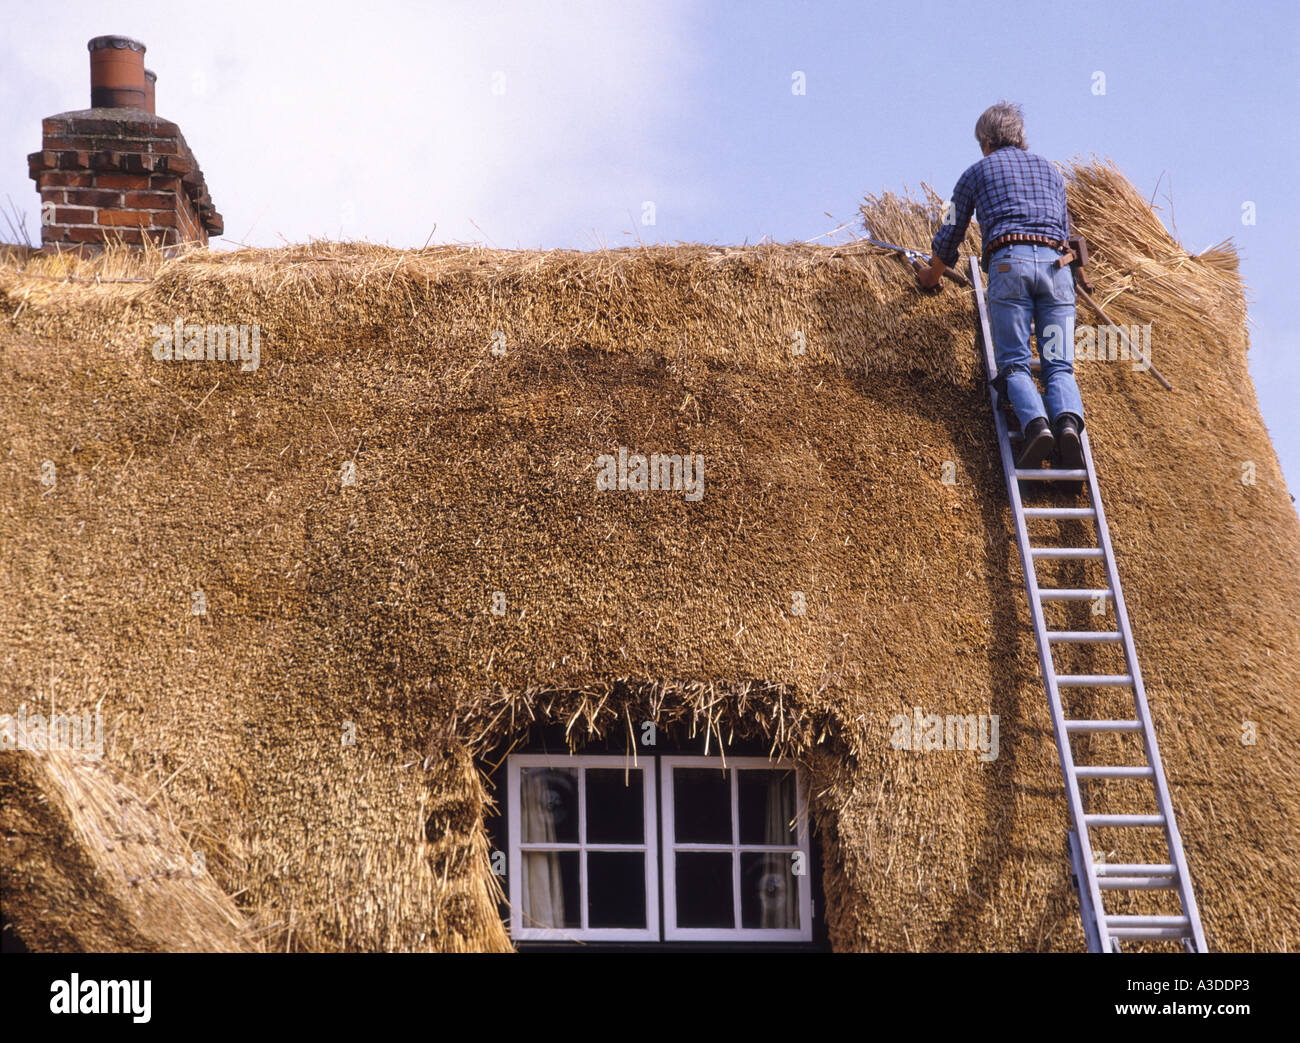 Thatcher working on aluminium ladder renewing old fashioned thatched roof on half timbered country cottage Essex England UK Stock Photo